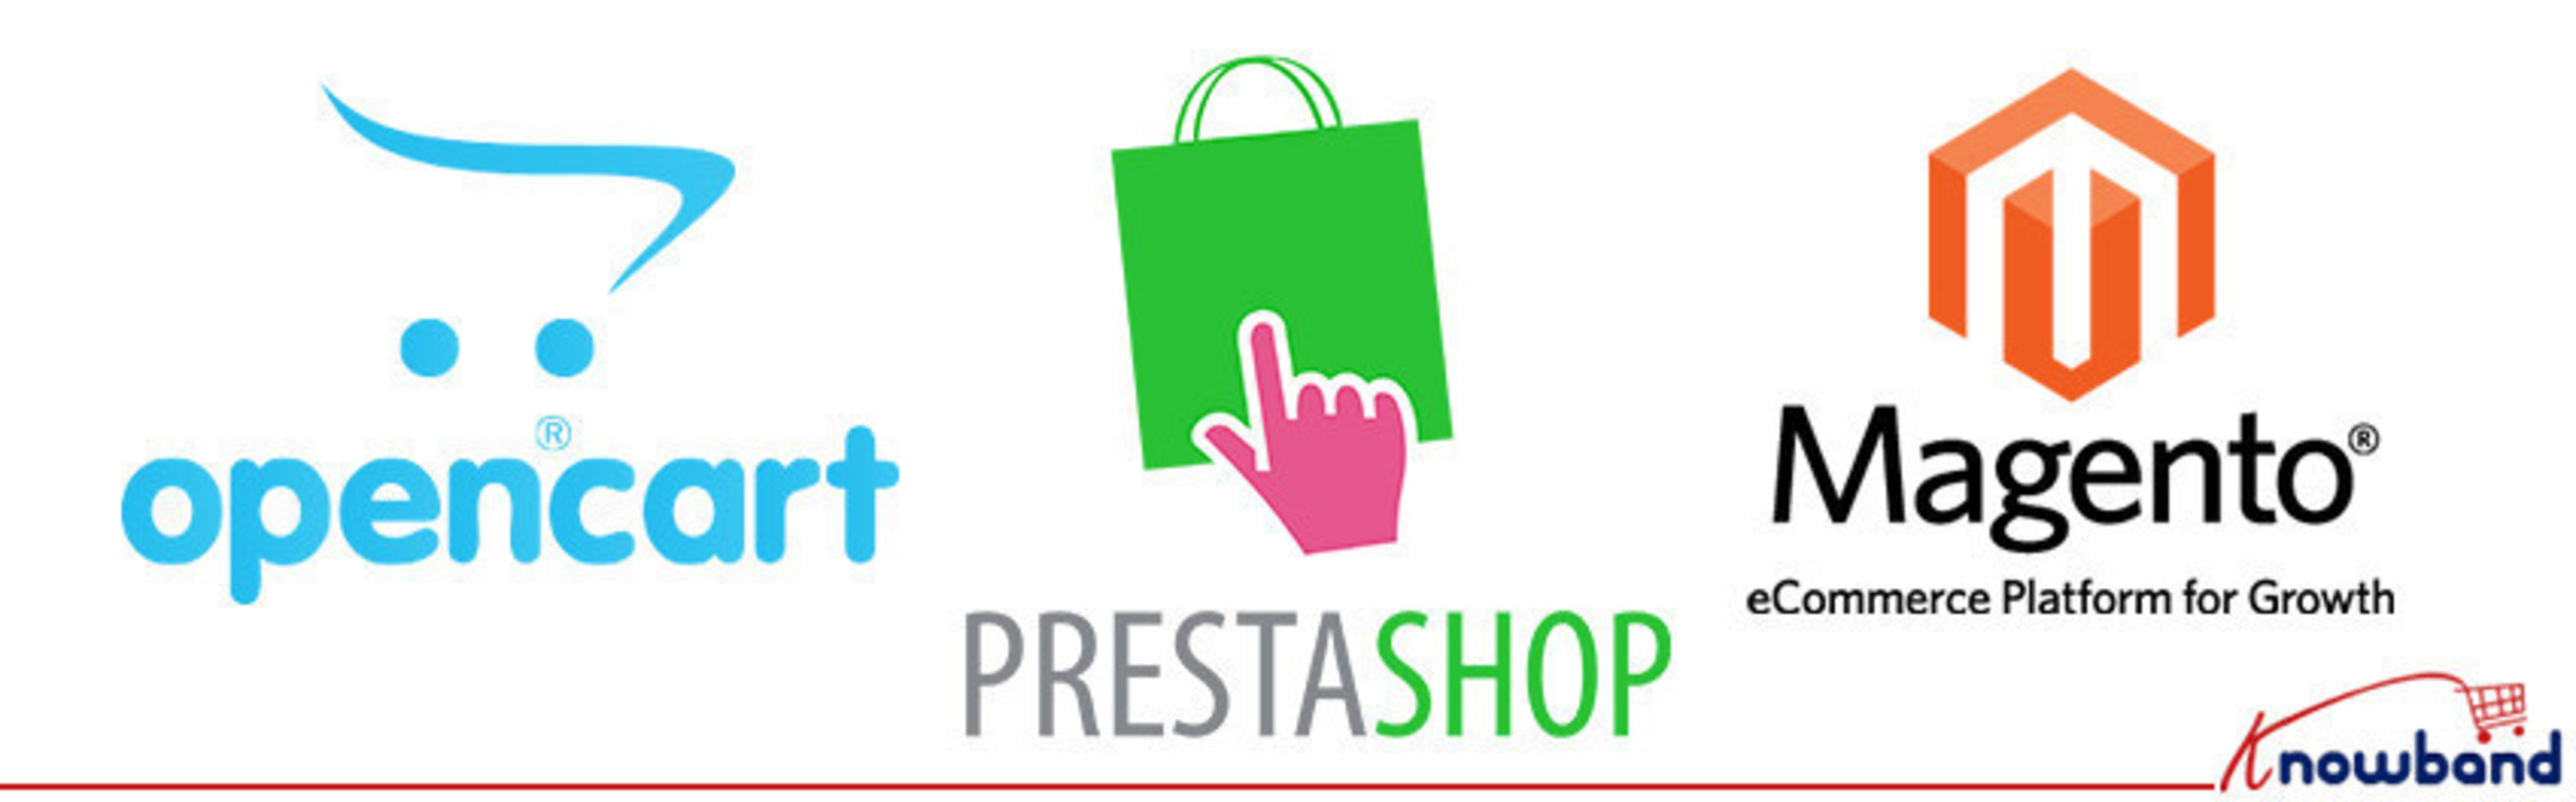 Knowband Plugins Bring Cheers for Magento, PrestaShop and OpenCart Stores | knowband